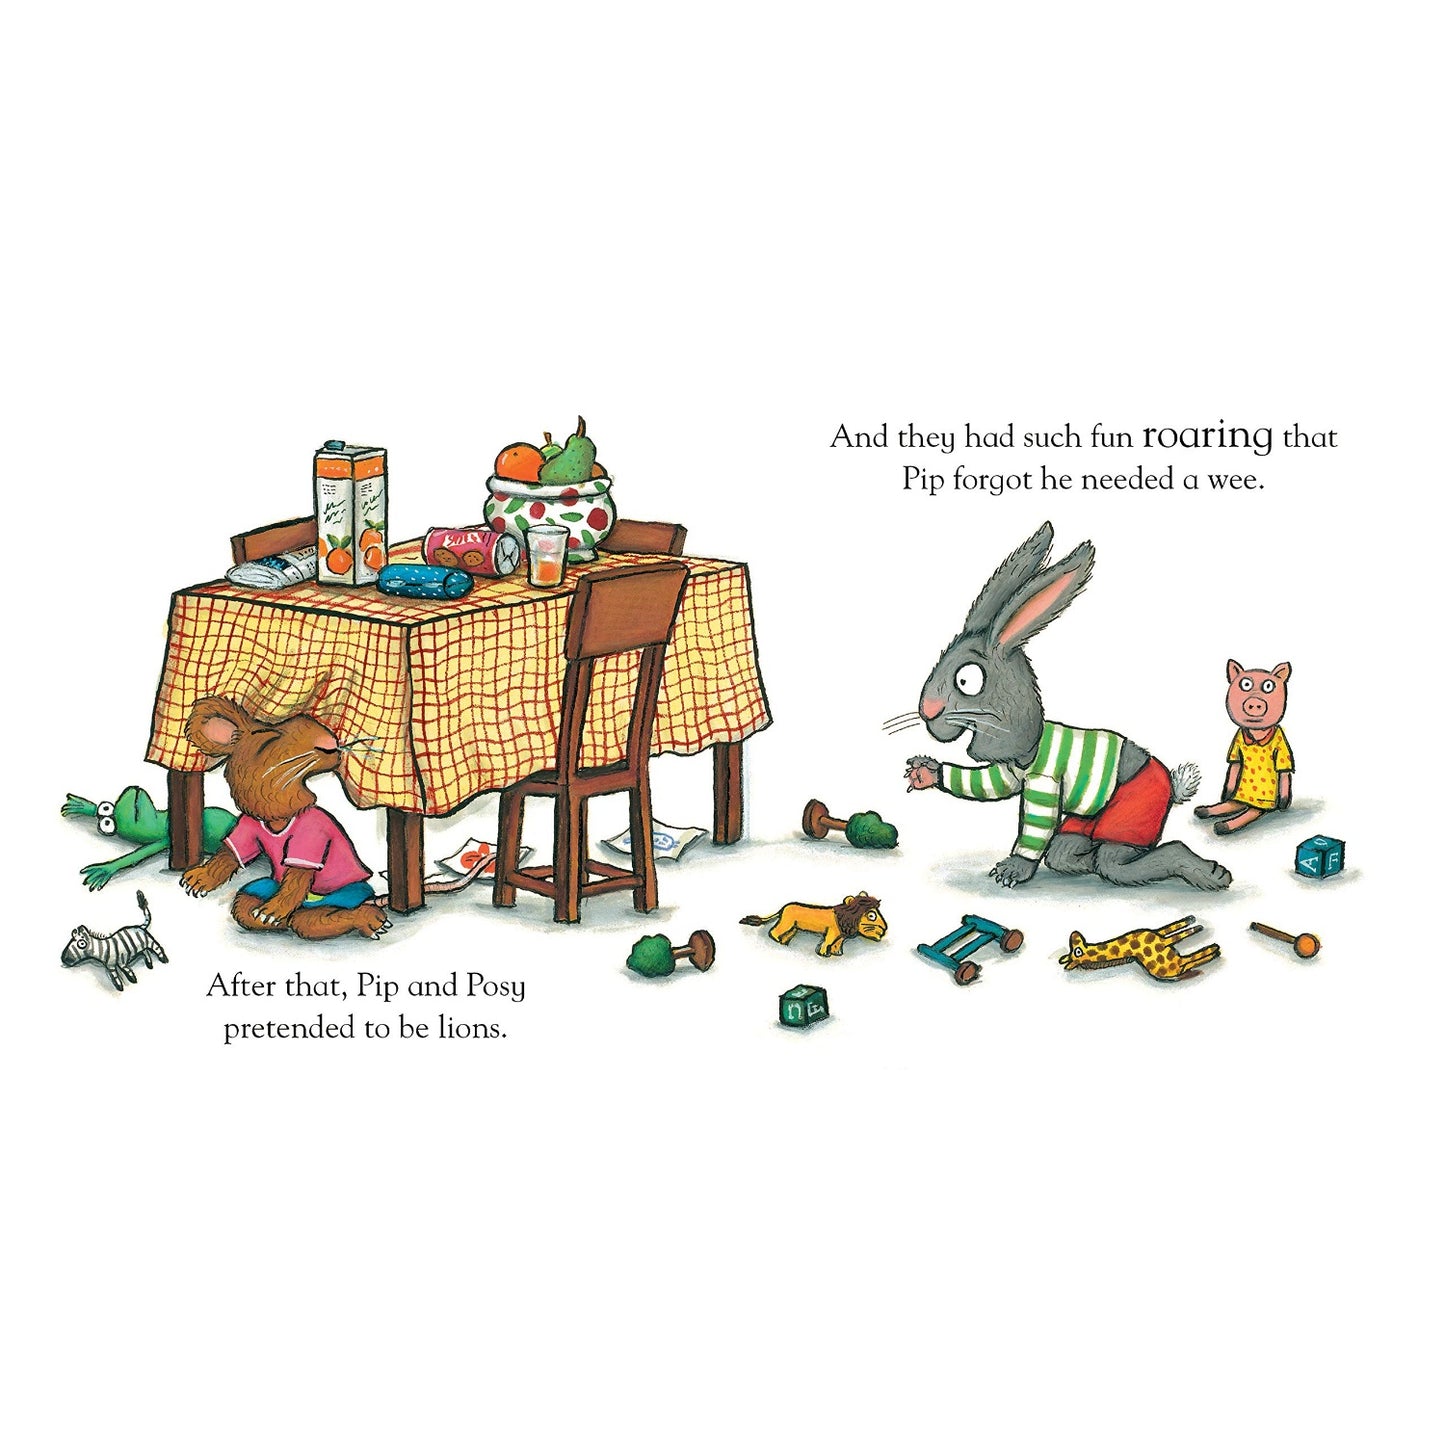 The Little Puddle - Pip & Posy | Paperback | Toddler’s Book on Friendship